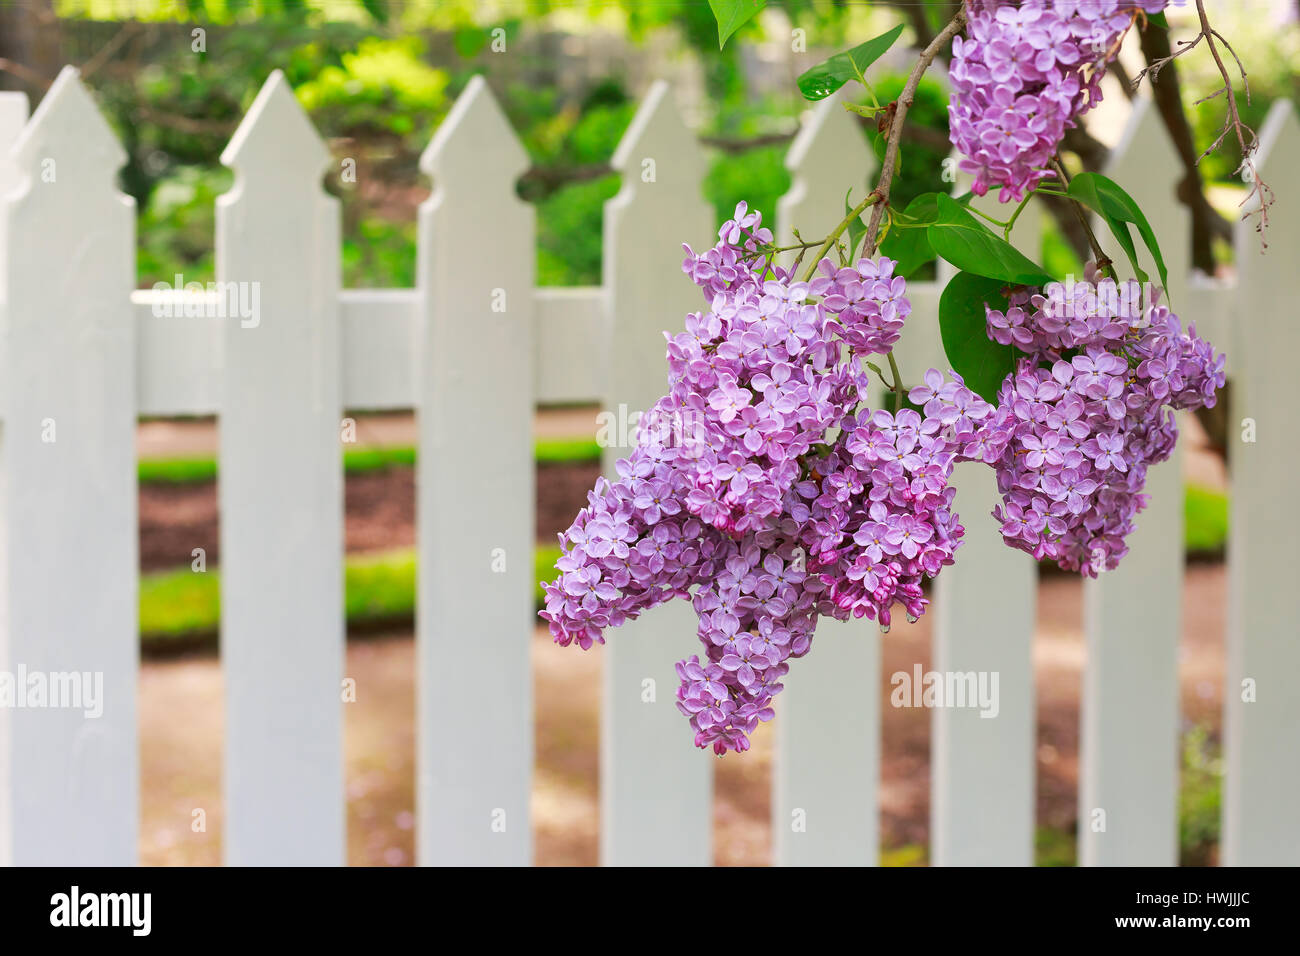 Lilacs in front of a white picket fence. Stock Photo